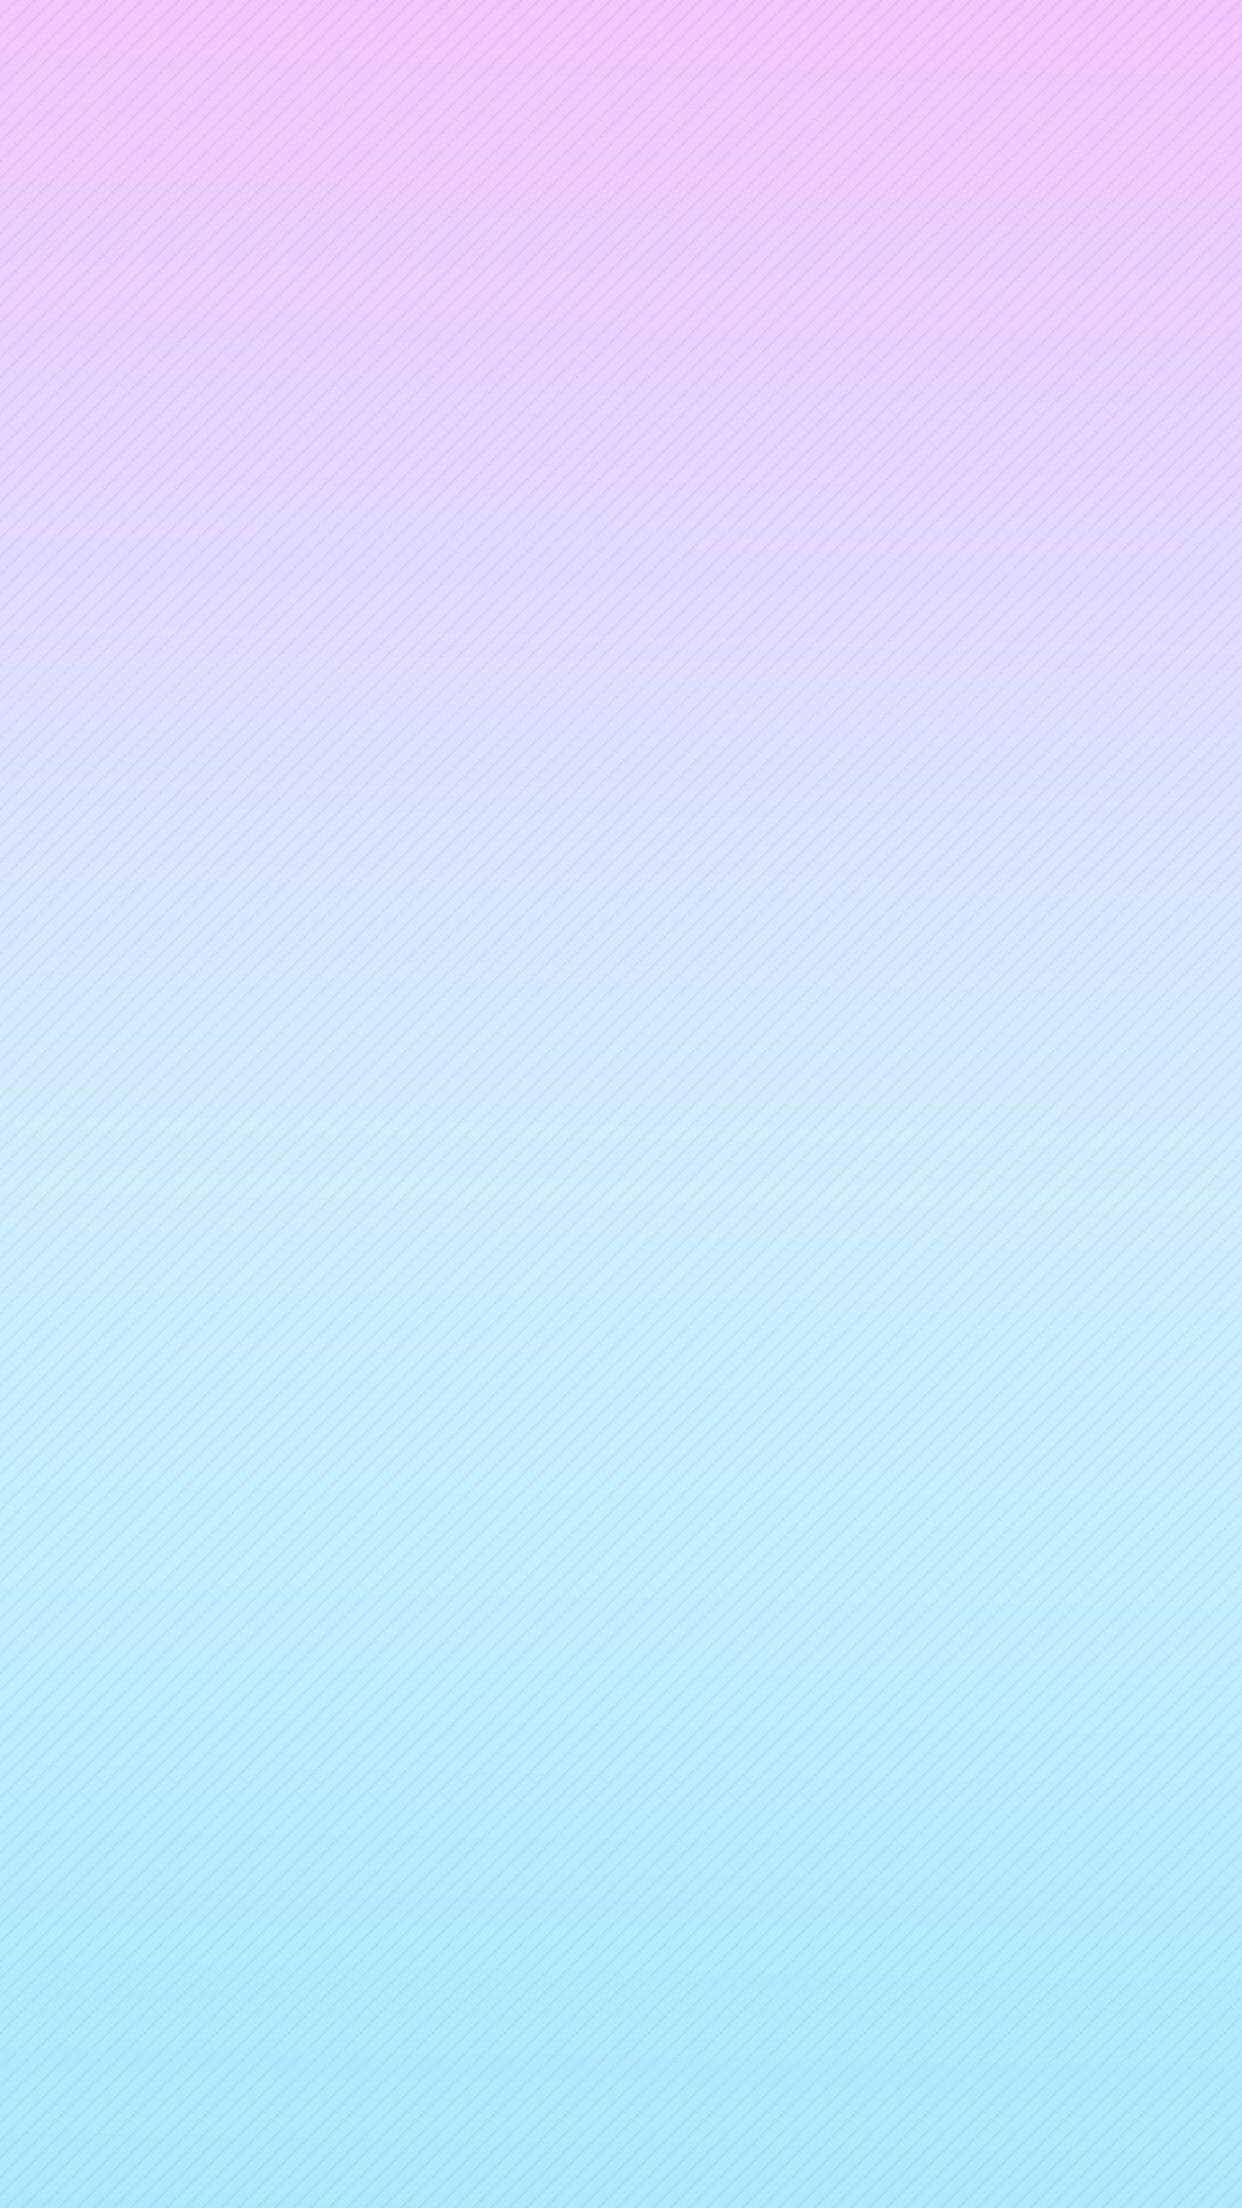 Pastel Blue Ombre Wallpapers - Top Free Pastel Blue Ombre ...